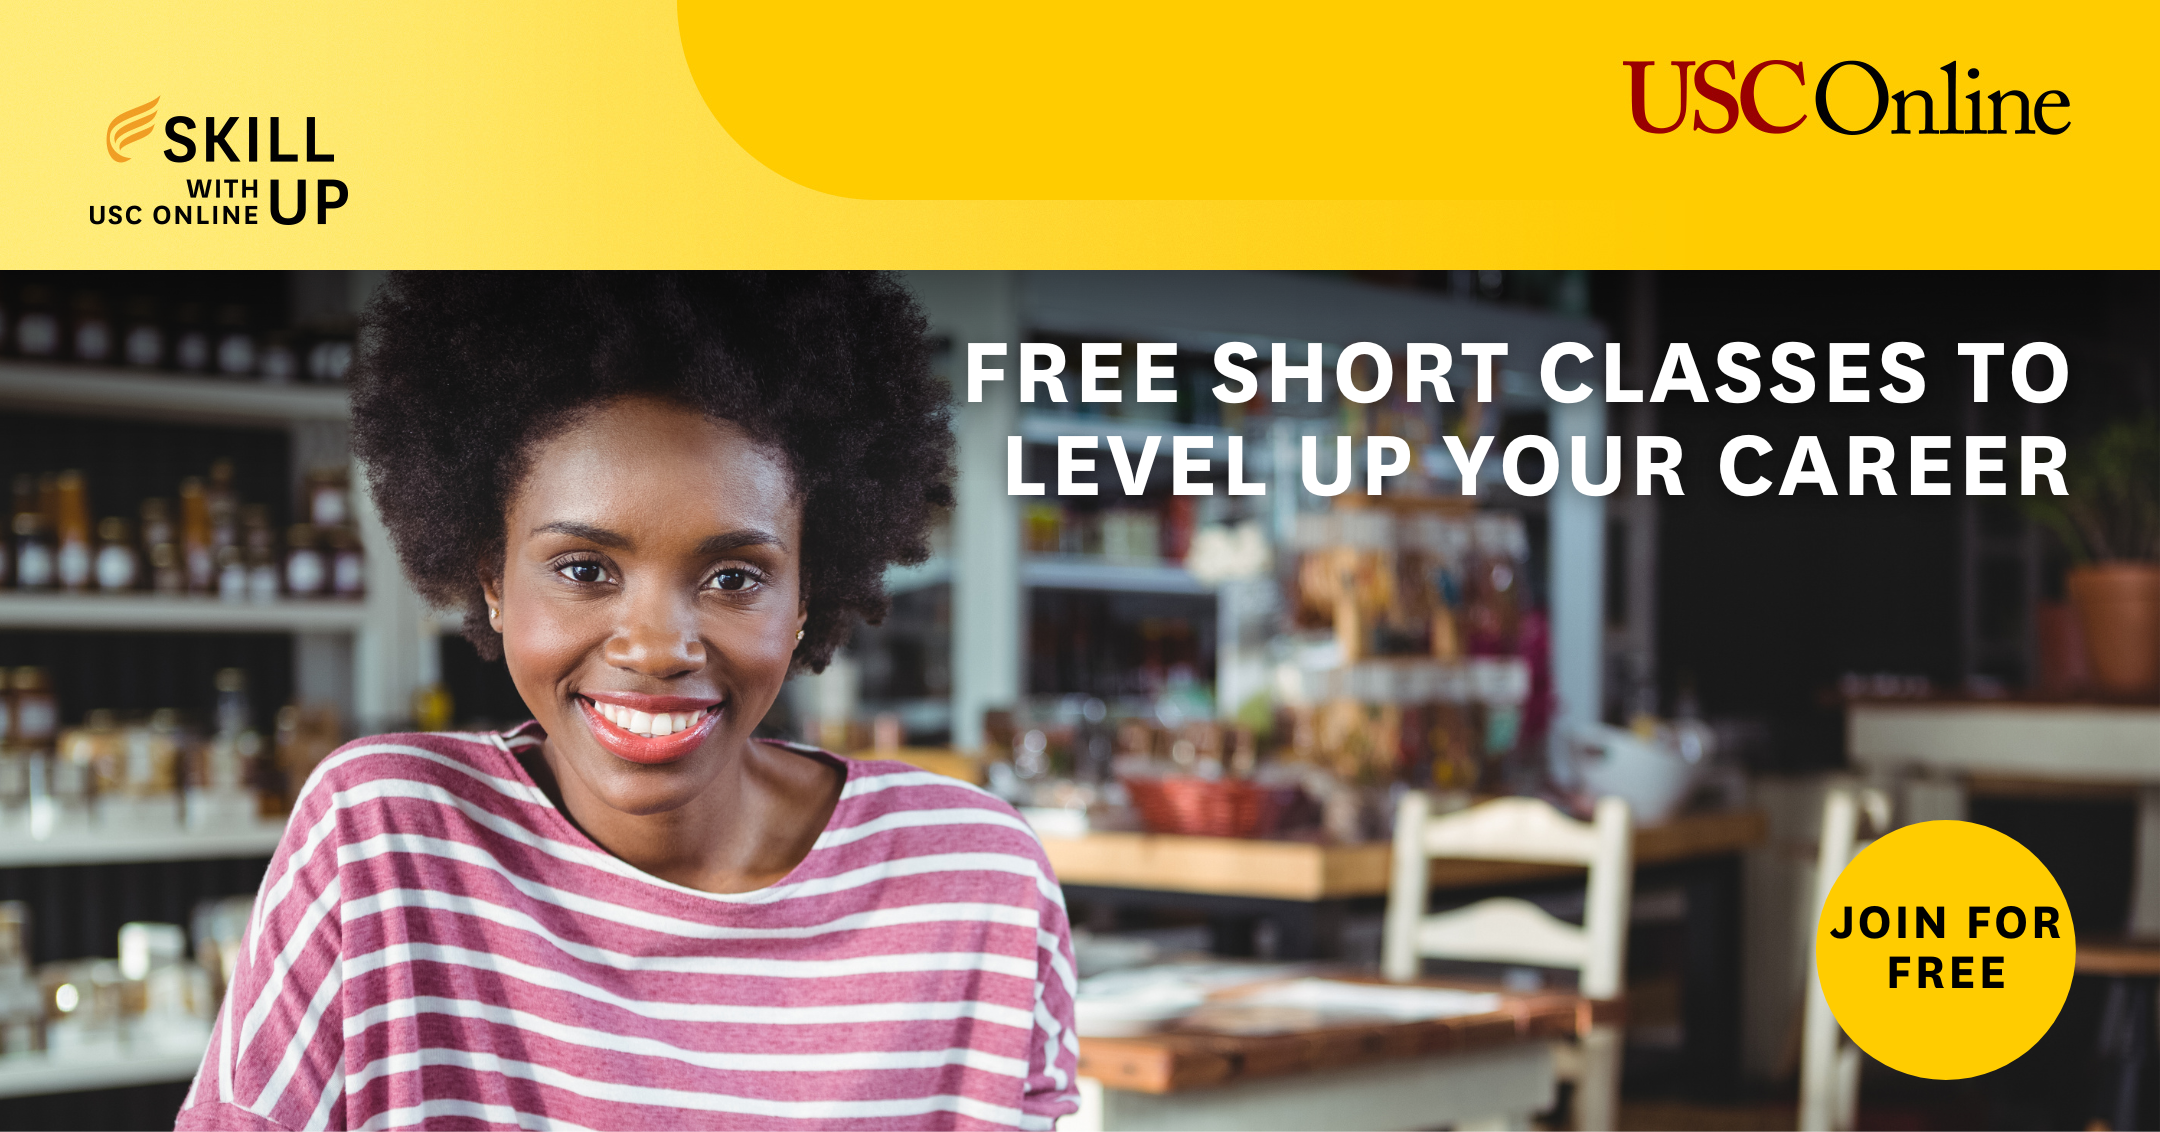 Skill Up Usc Online Ads